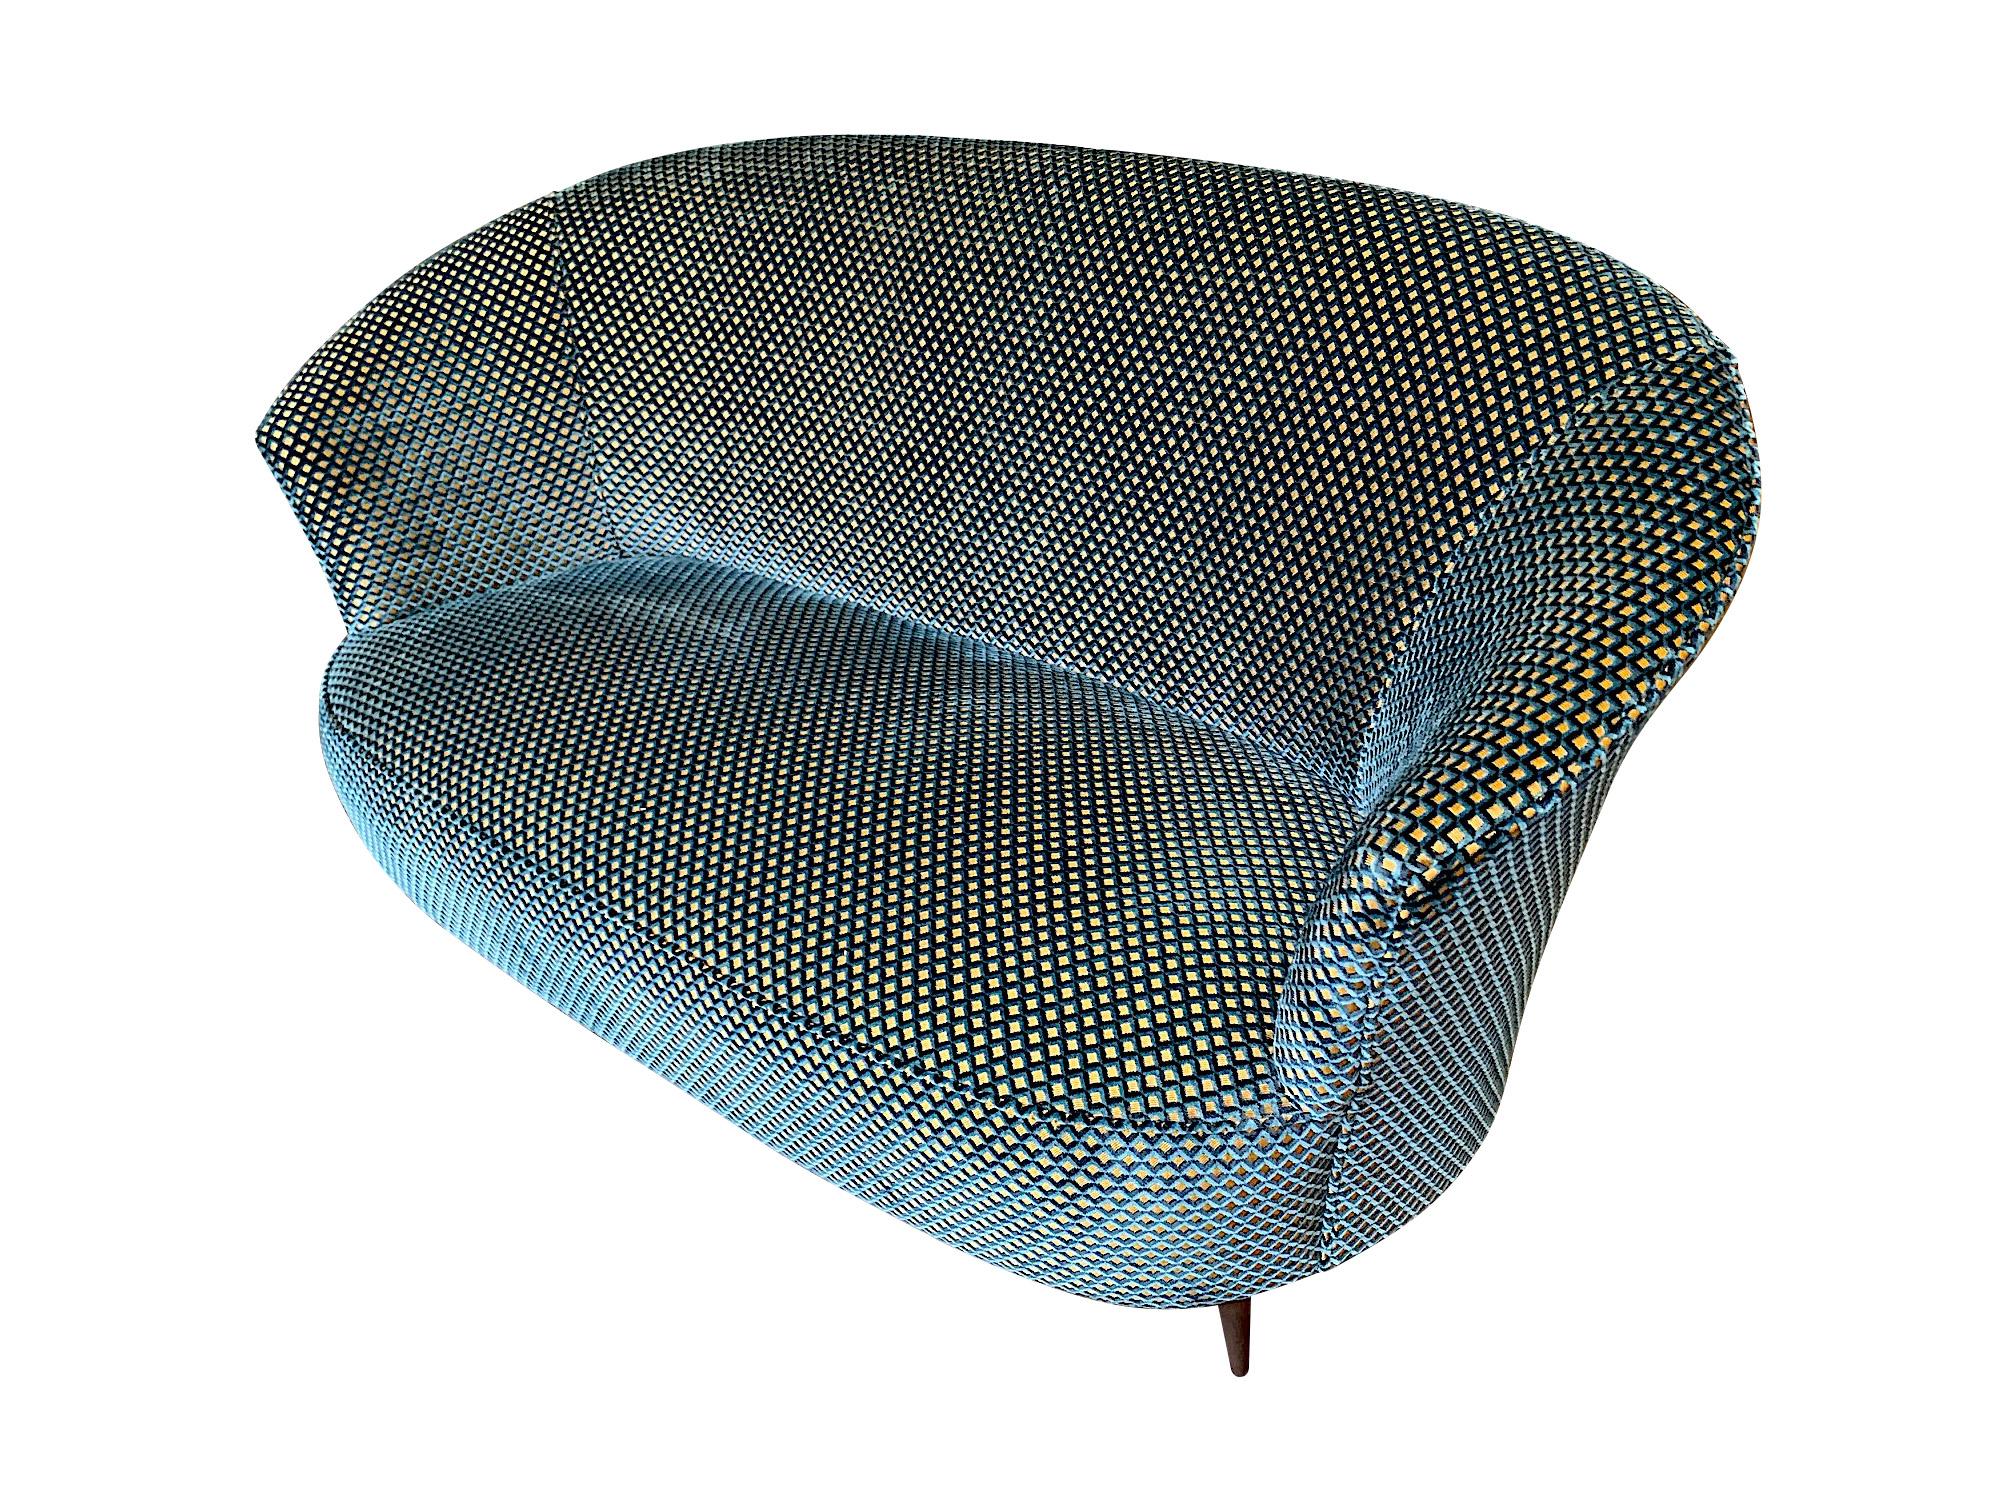 A lovely 1950s Gio Ponti style Italian two-seat sofa with original shaped wooden legs. Newly reupholstered in designer guild blue velvet and gold fabric.